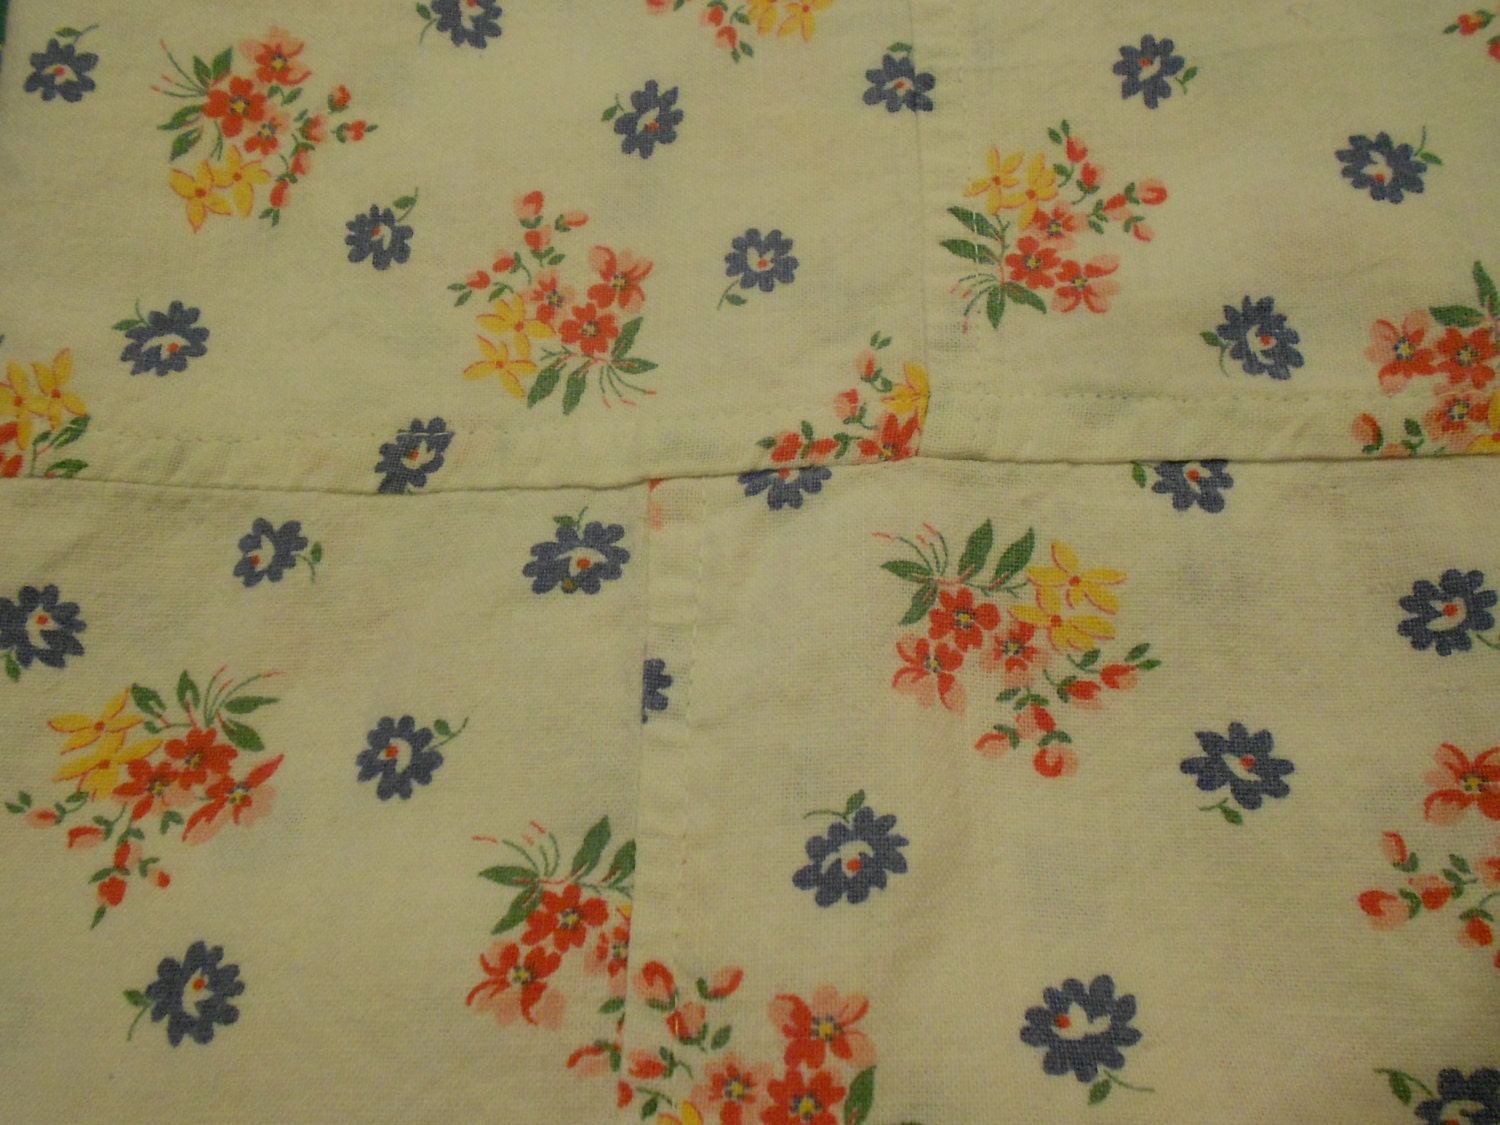 48 piece of vintage material used as tablecloth